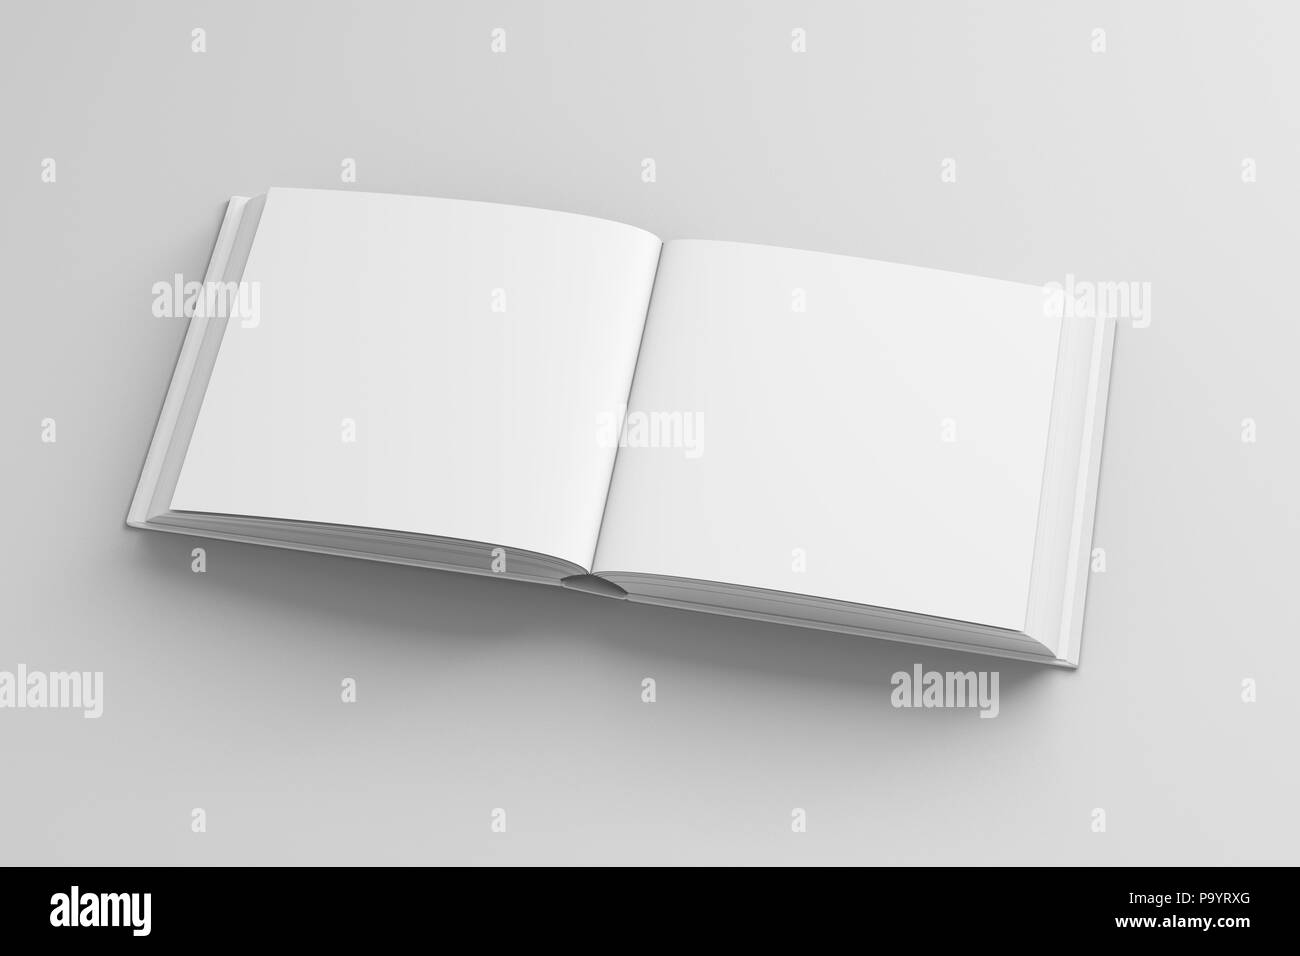 Premium Vector  Set of empty book mockup realistic blank book in hardcover  in different angles applicable for design